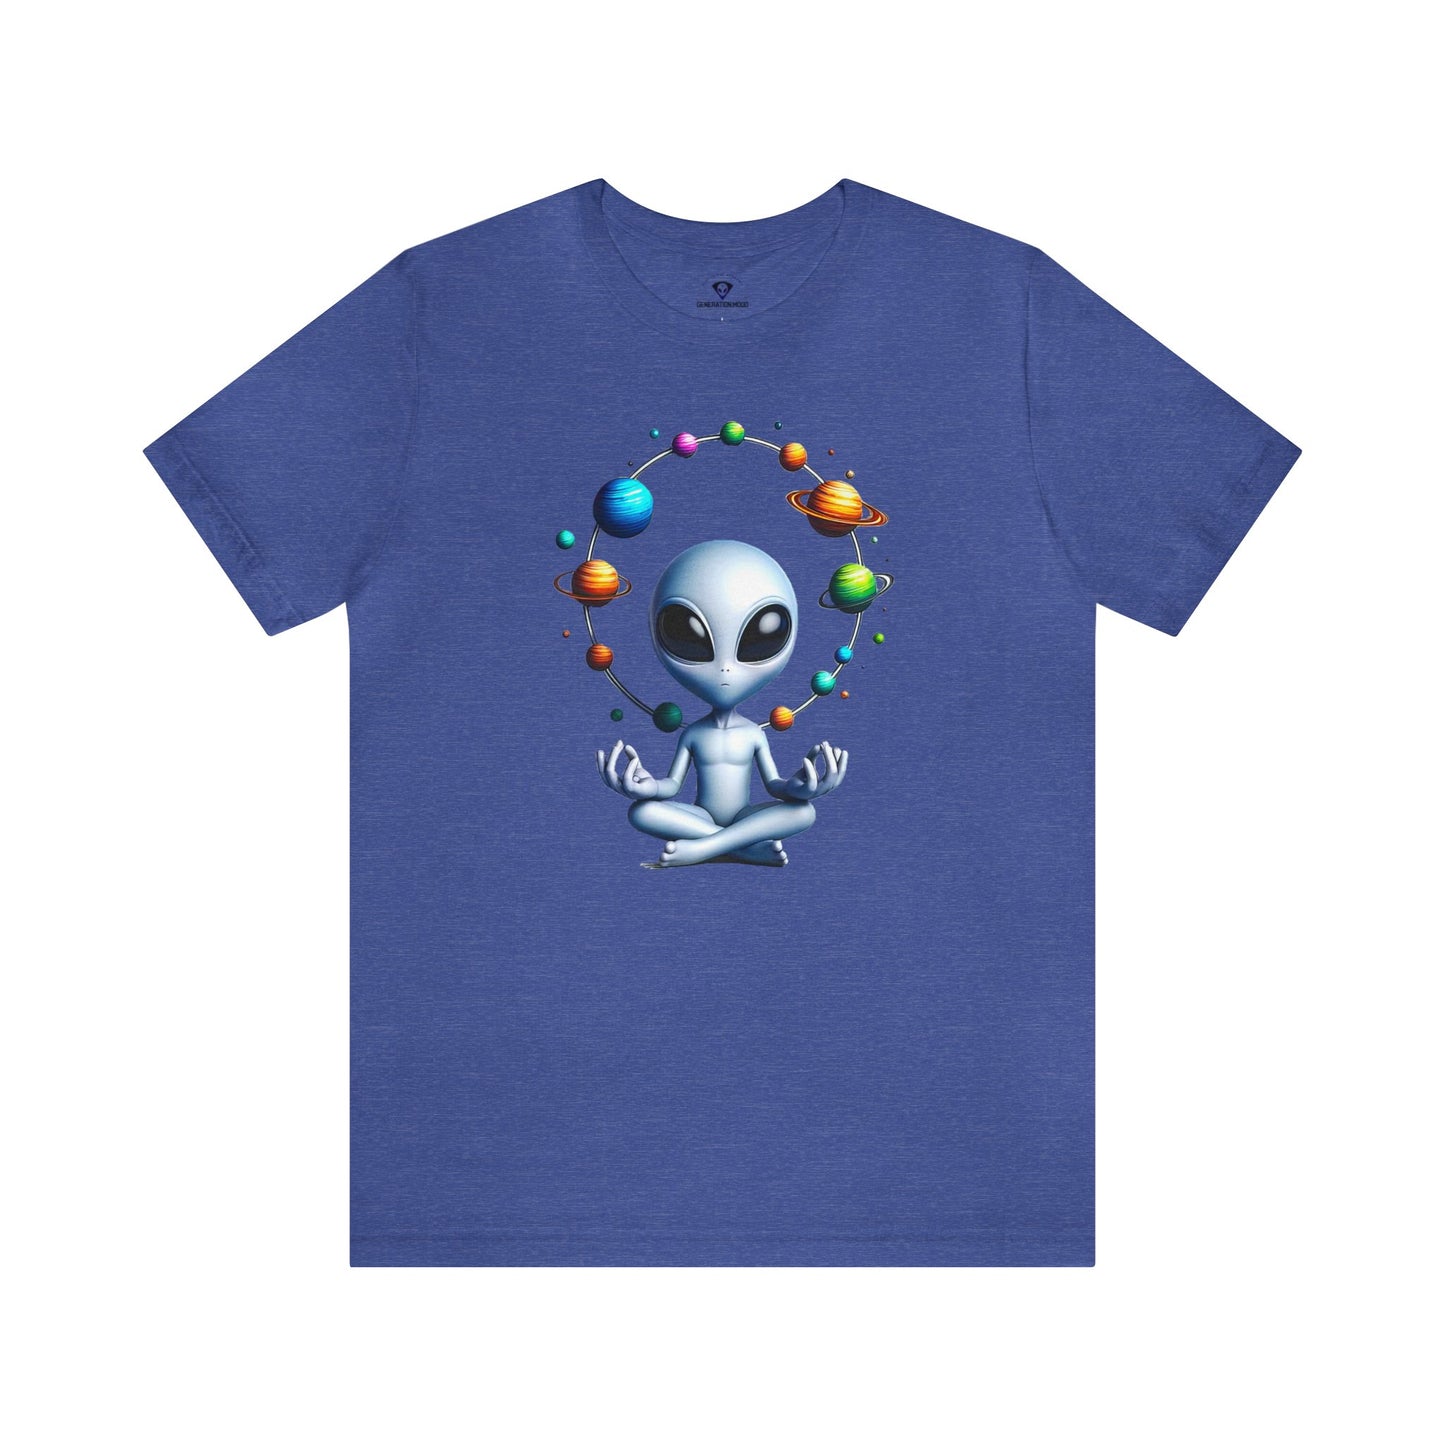 Generation Mood's Meditation in the Cosmos: Alien Sweatshirt , Find Your Zen Among the Planets tee in royal blue.